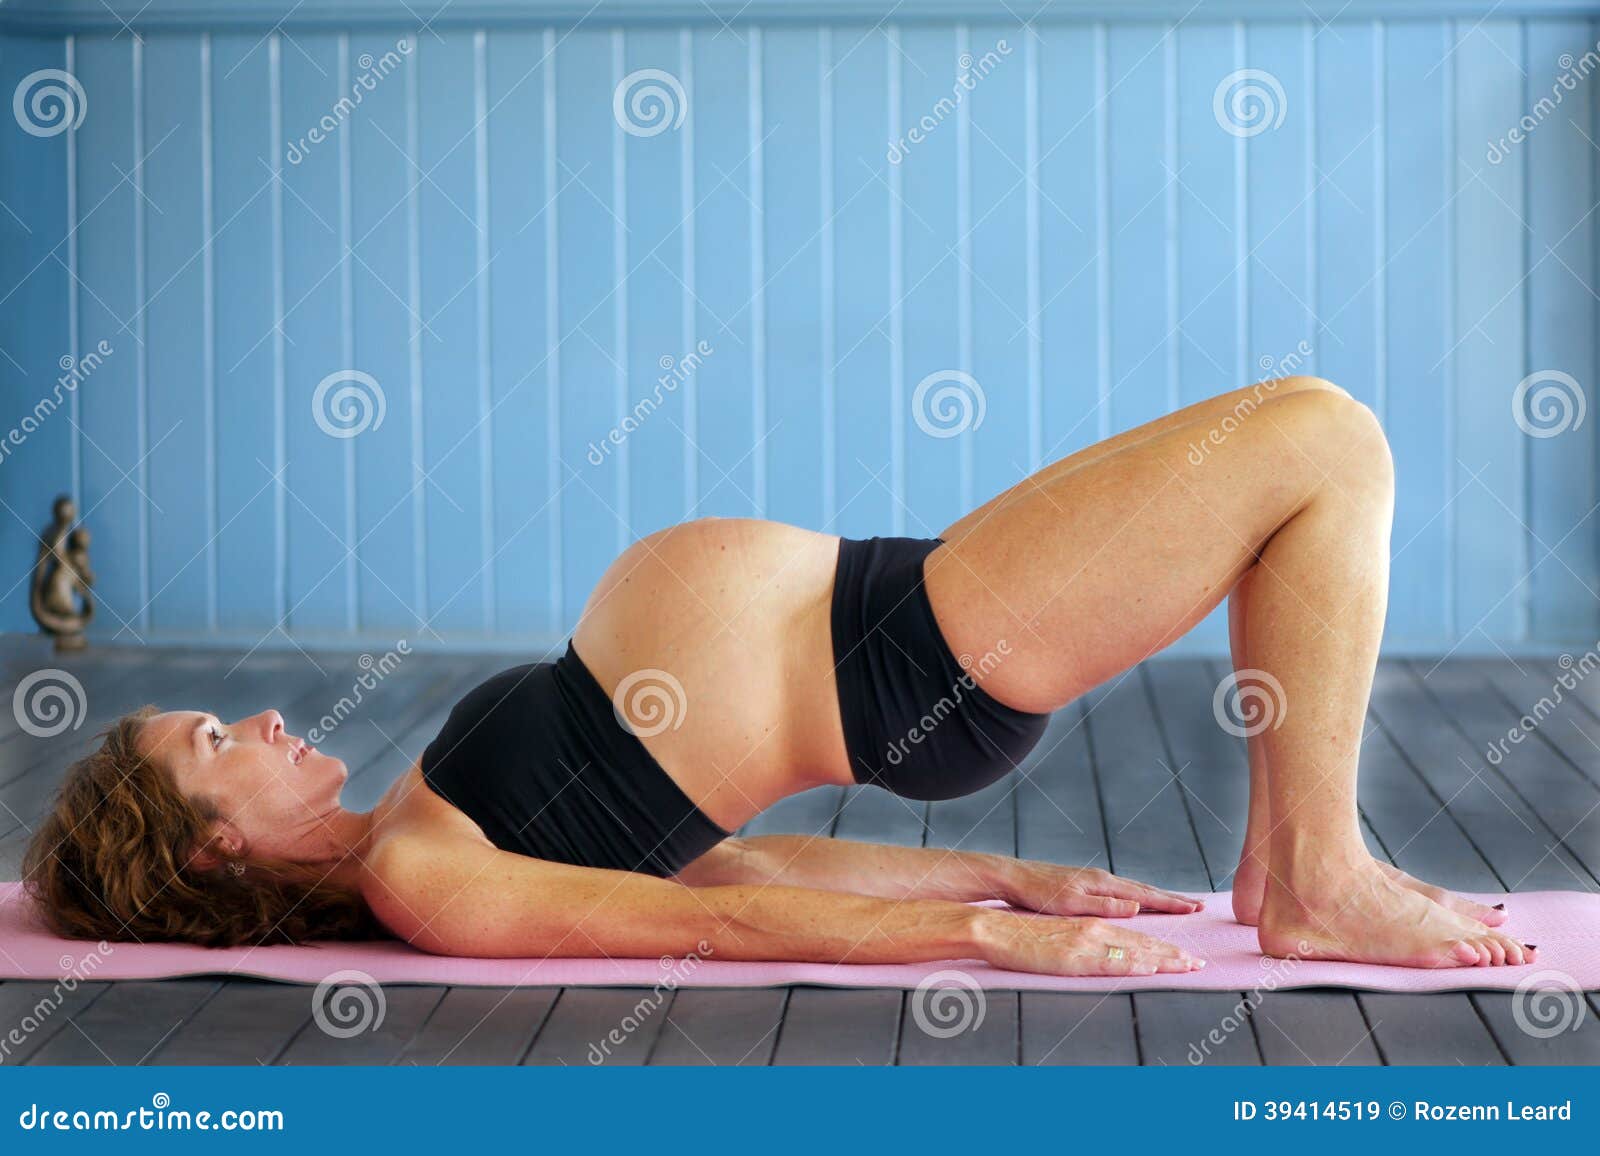 Premium Photo | Young active pregnant woman performs a gluteal bridge on a  fitness mat during a light workout at home against the background of  windows overlooking the beautiful garden fitness and